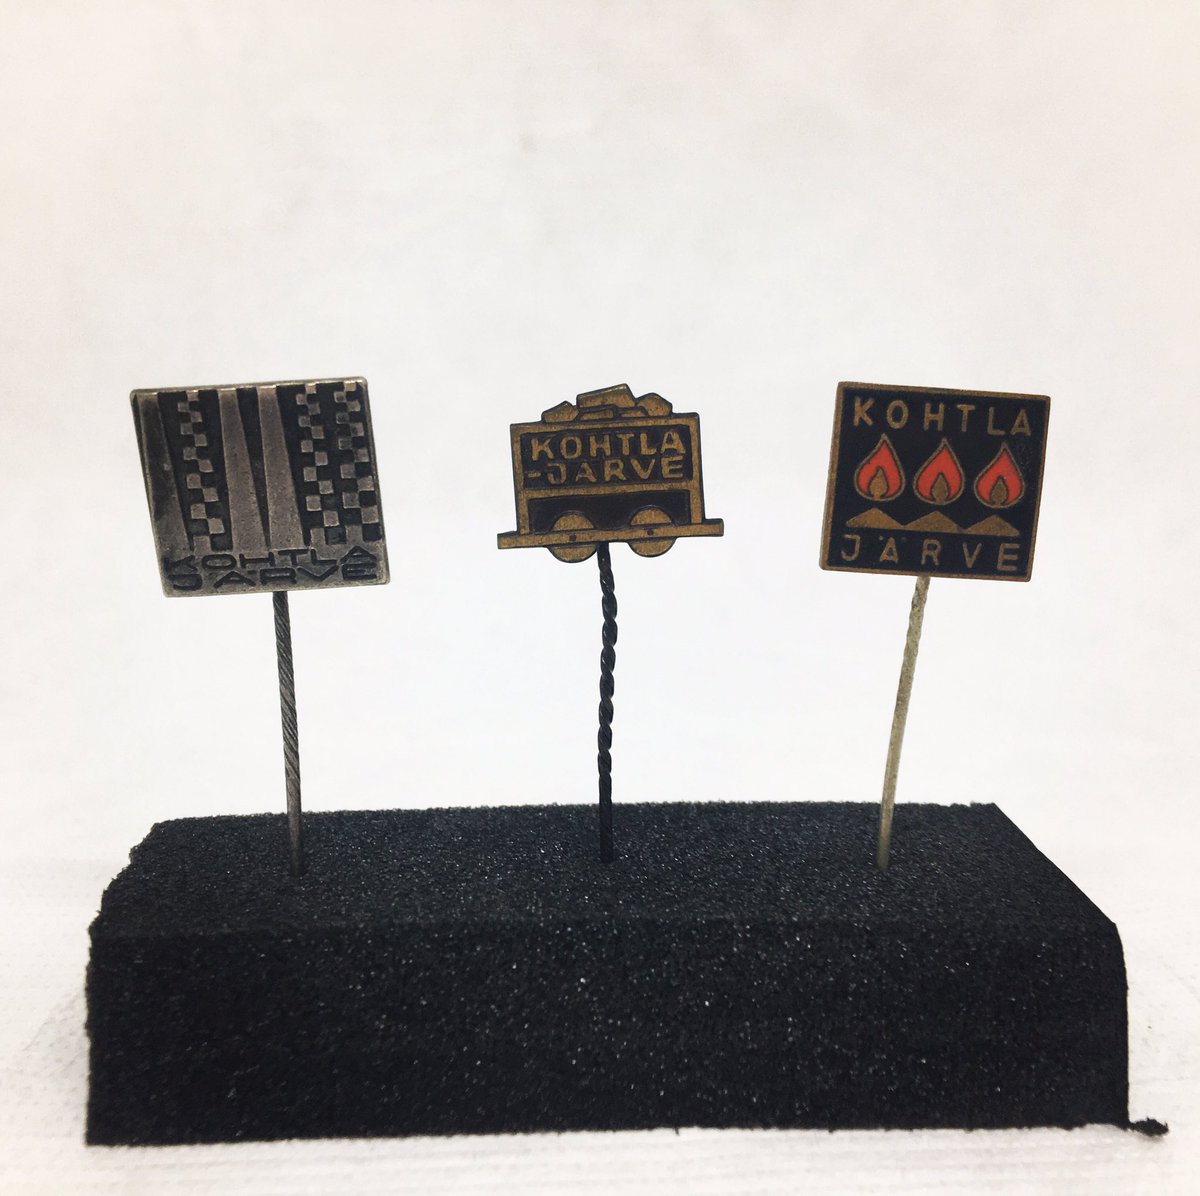 It’s always exciting to add new objects to our collection - these small pin badges come from Estonia, where they mined shale in the Kohtla Jarve region #shaleoil #shalemuseum #industrialhistory #museumcollections